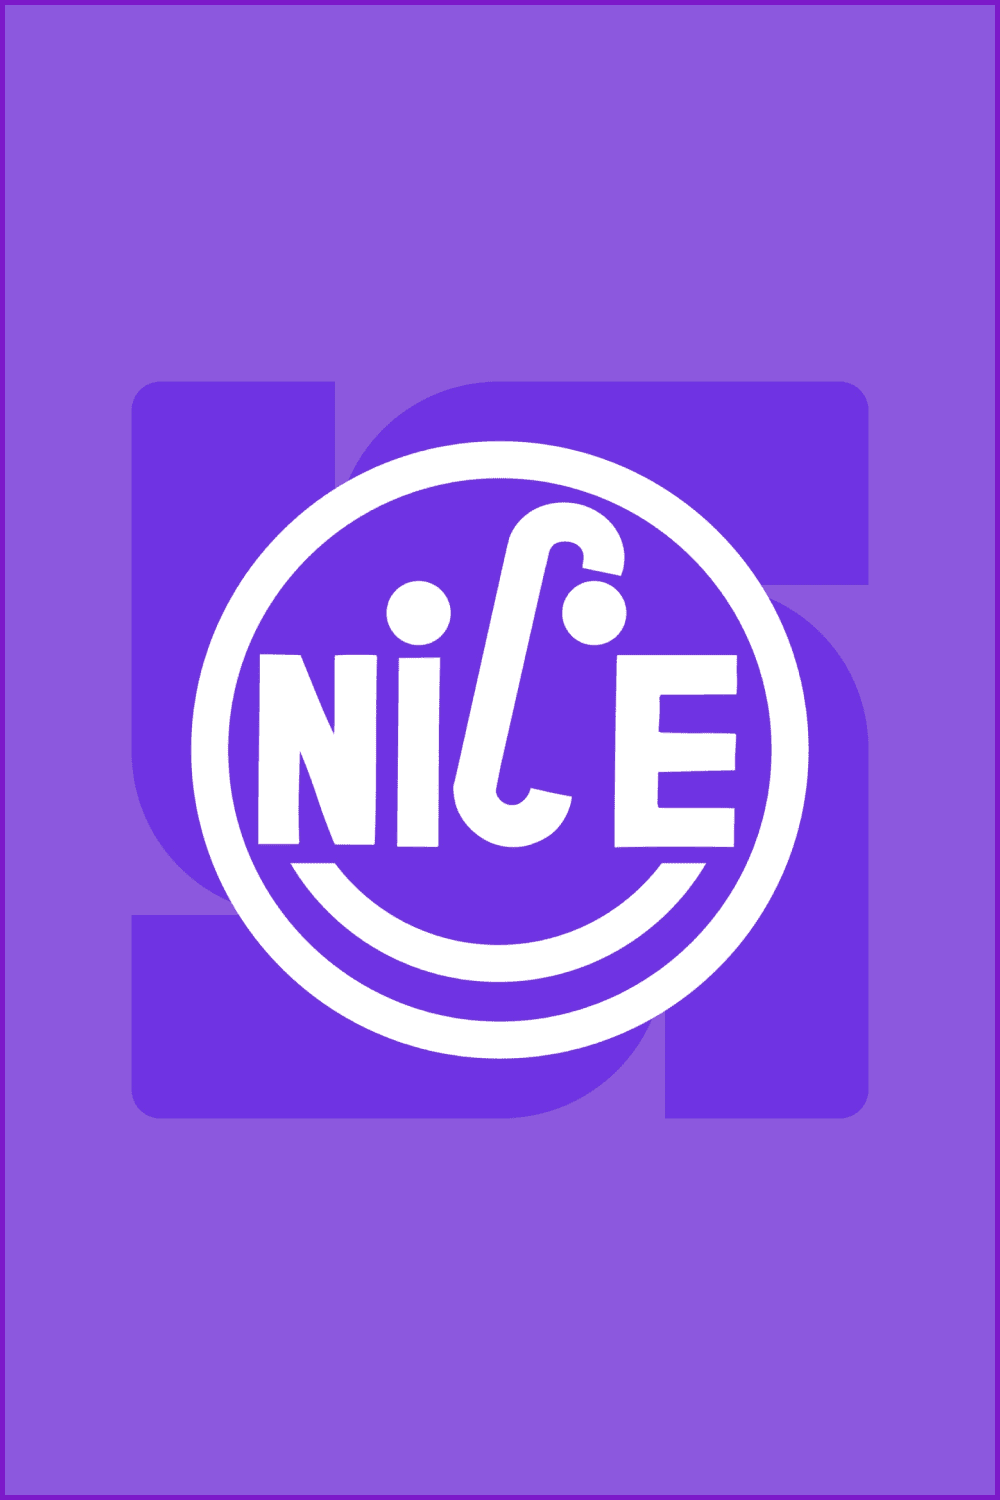 White circle with letters on purple background.